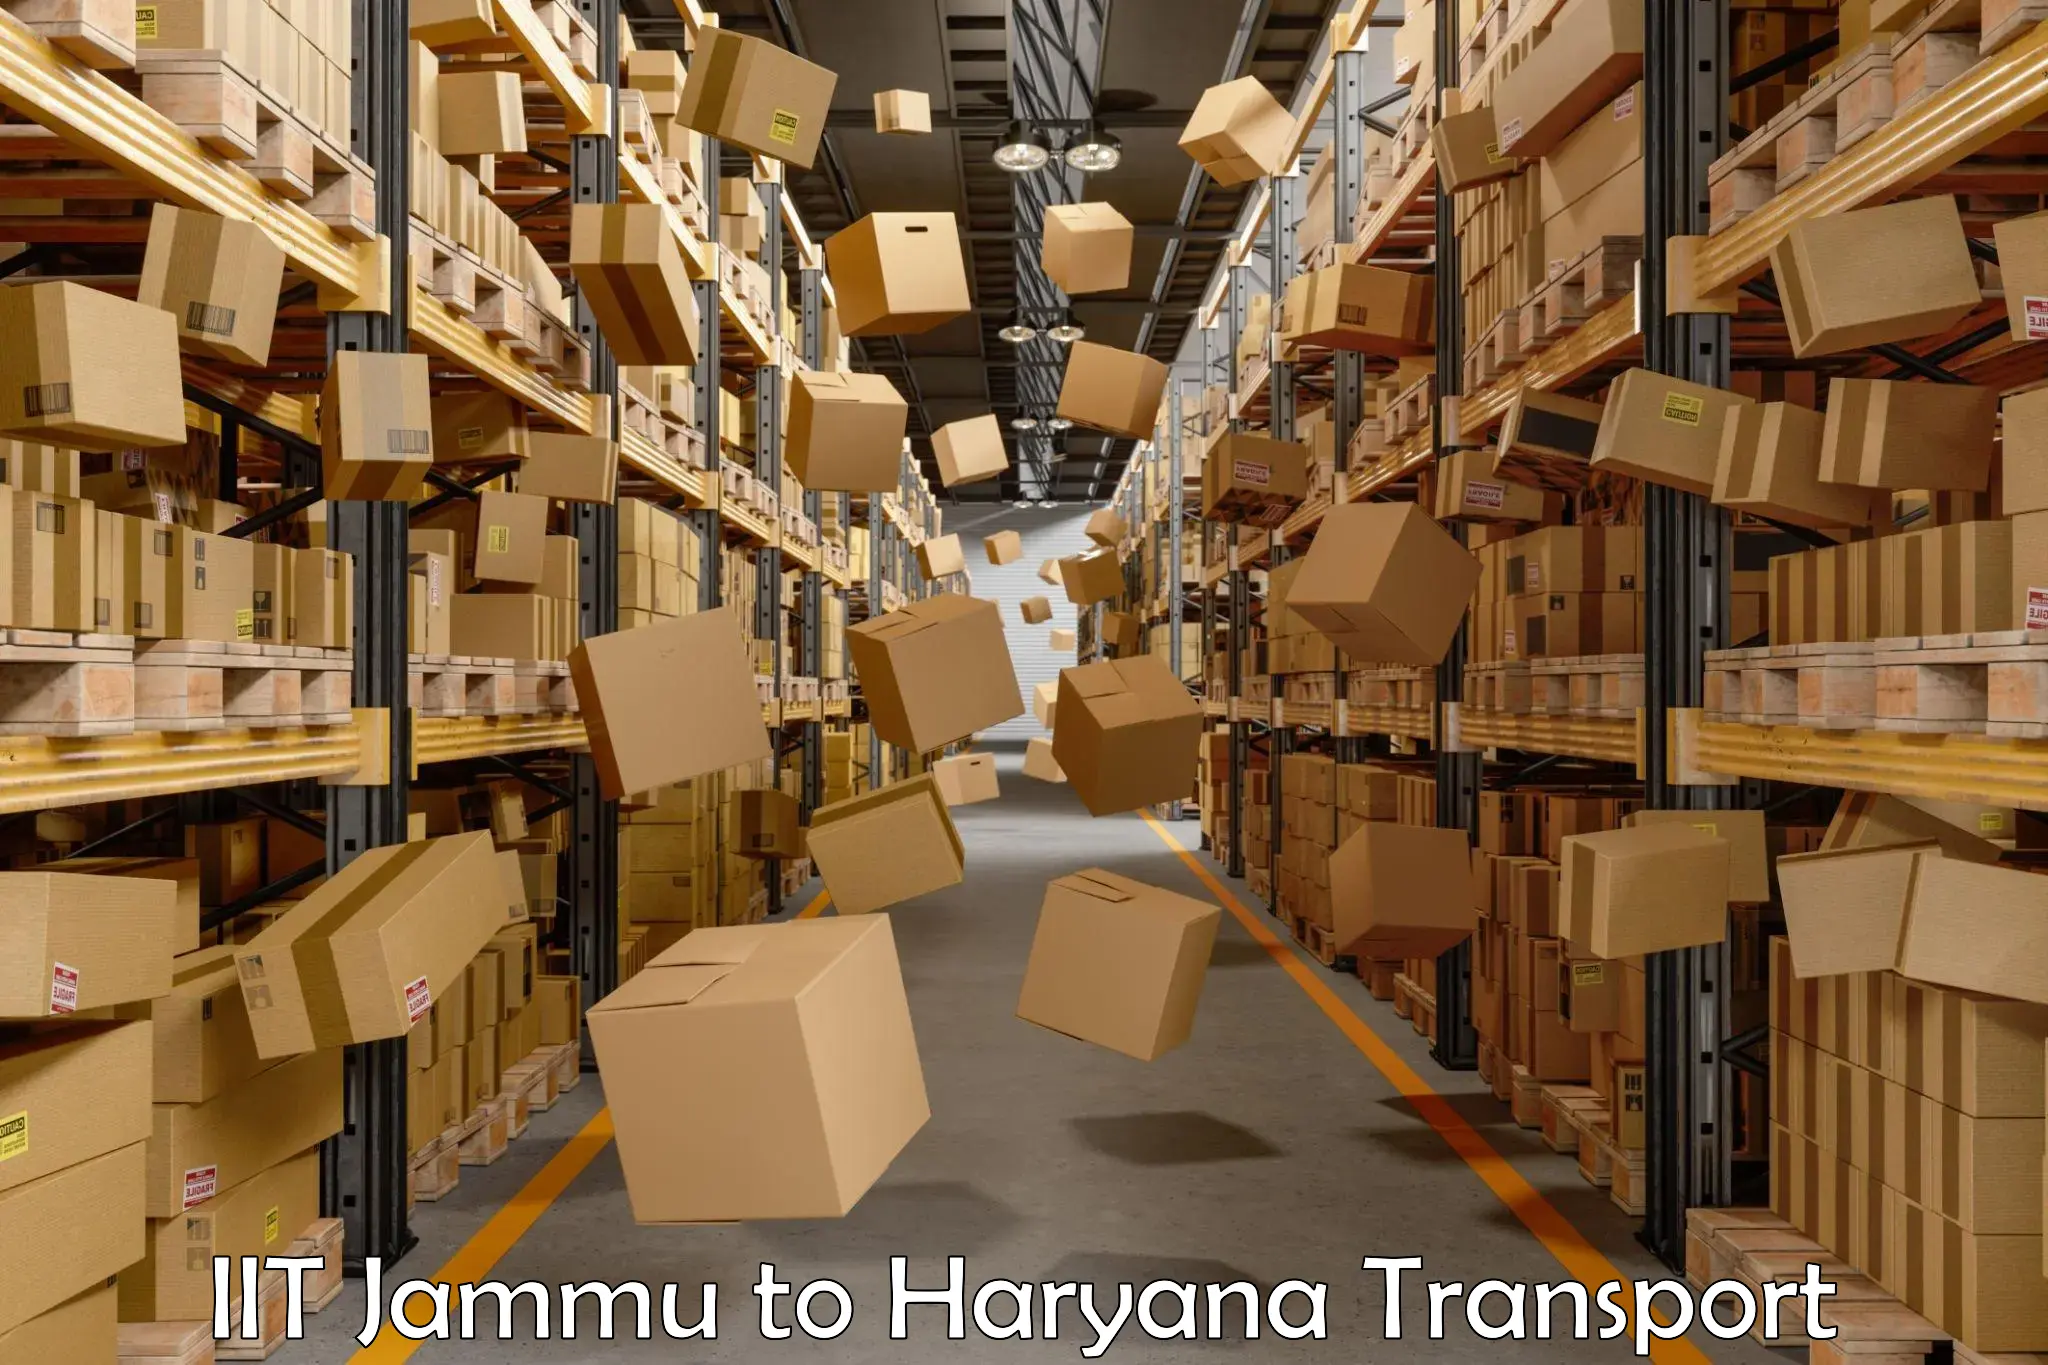 Road transport services in IIT Jammu to Haryana